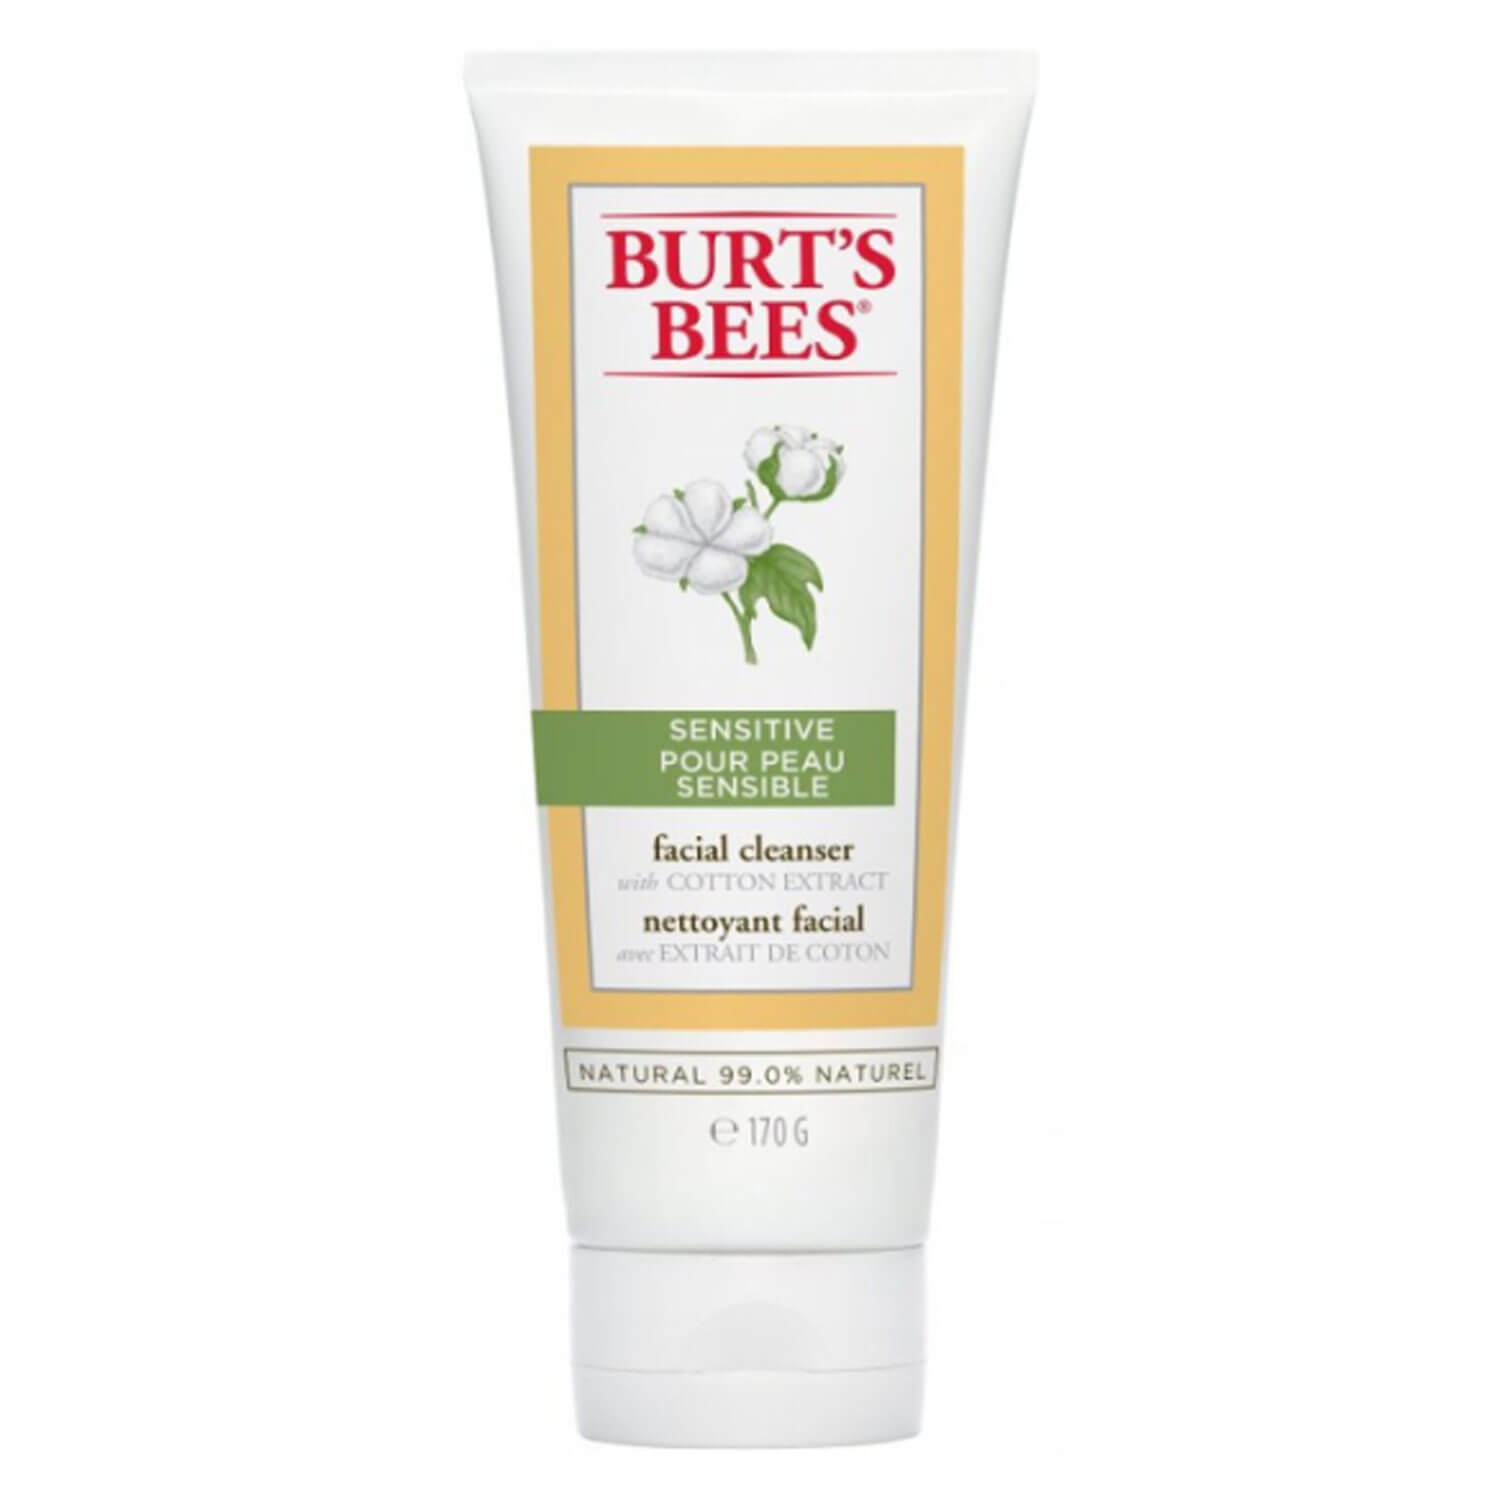 Product image from Burt's Bees - Sensitive Facial Cleanser Cotton Extract